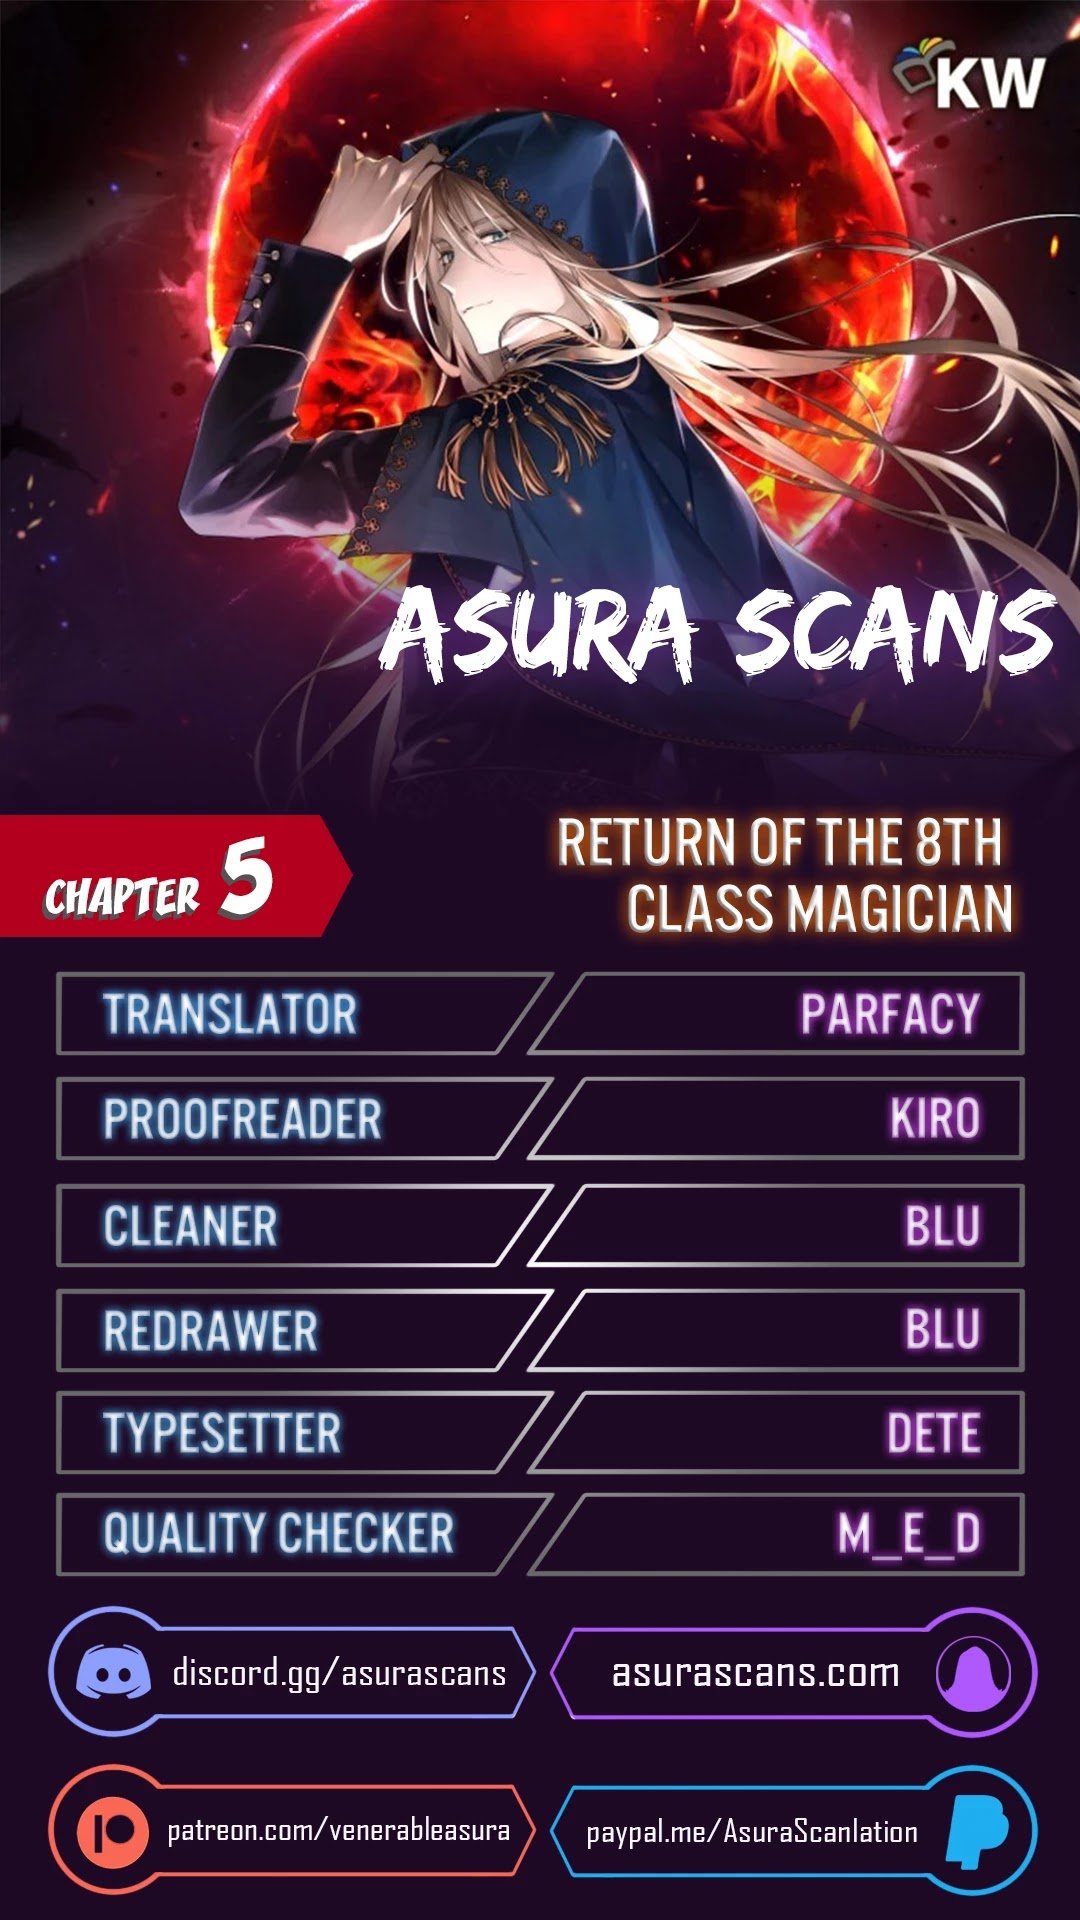 Return of the 8th class Magician chapter 5